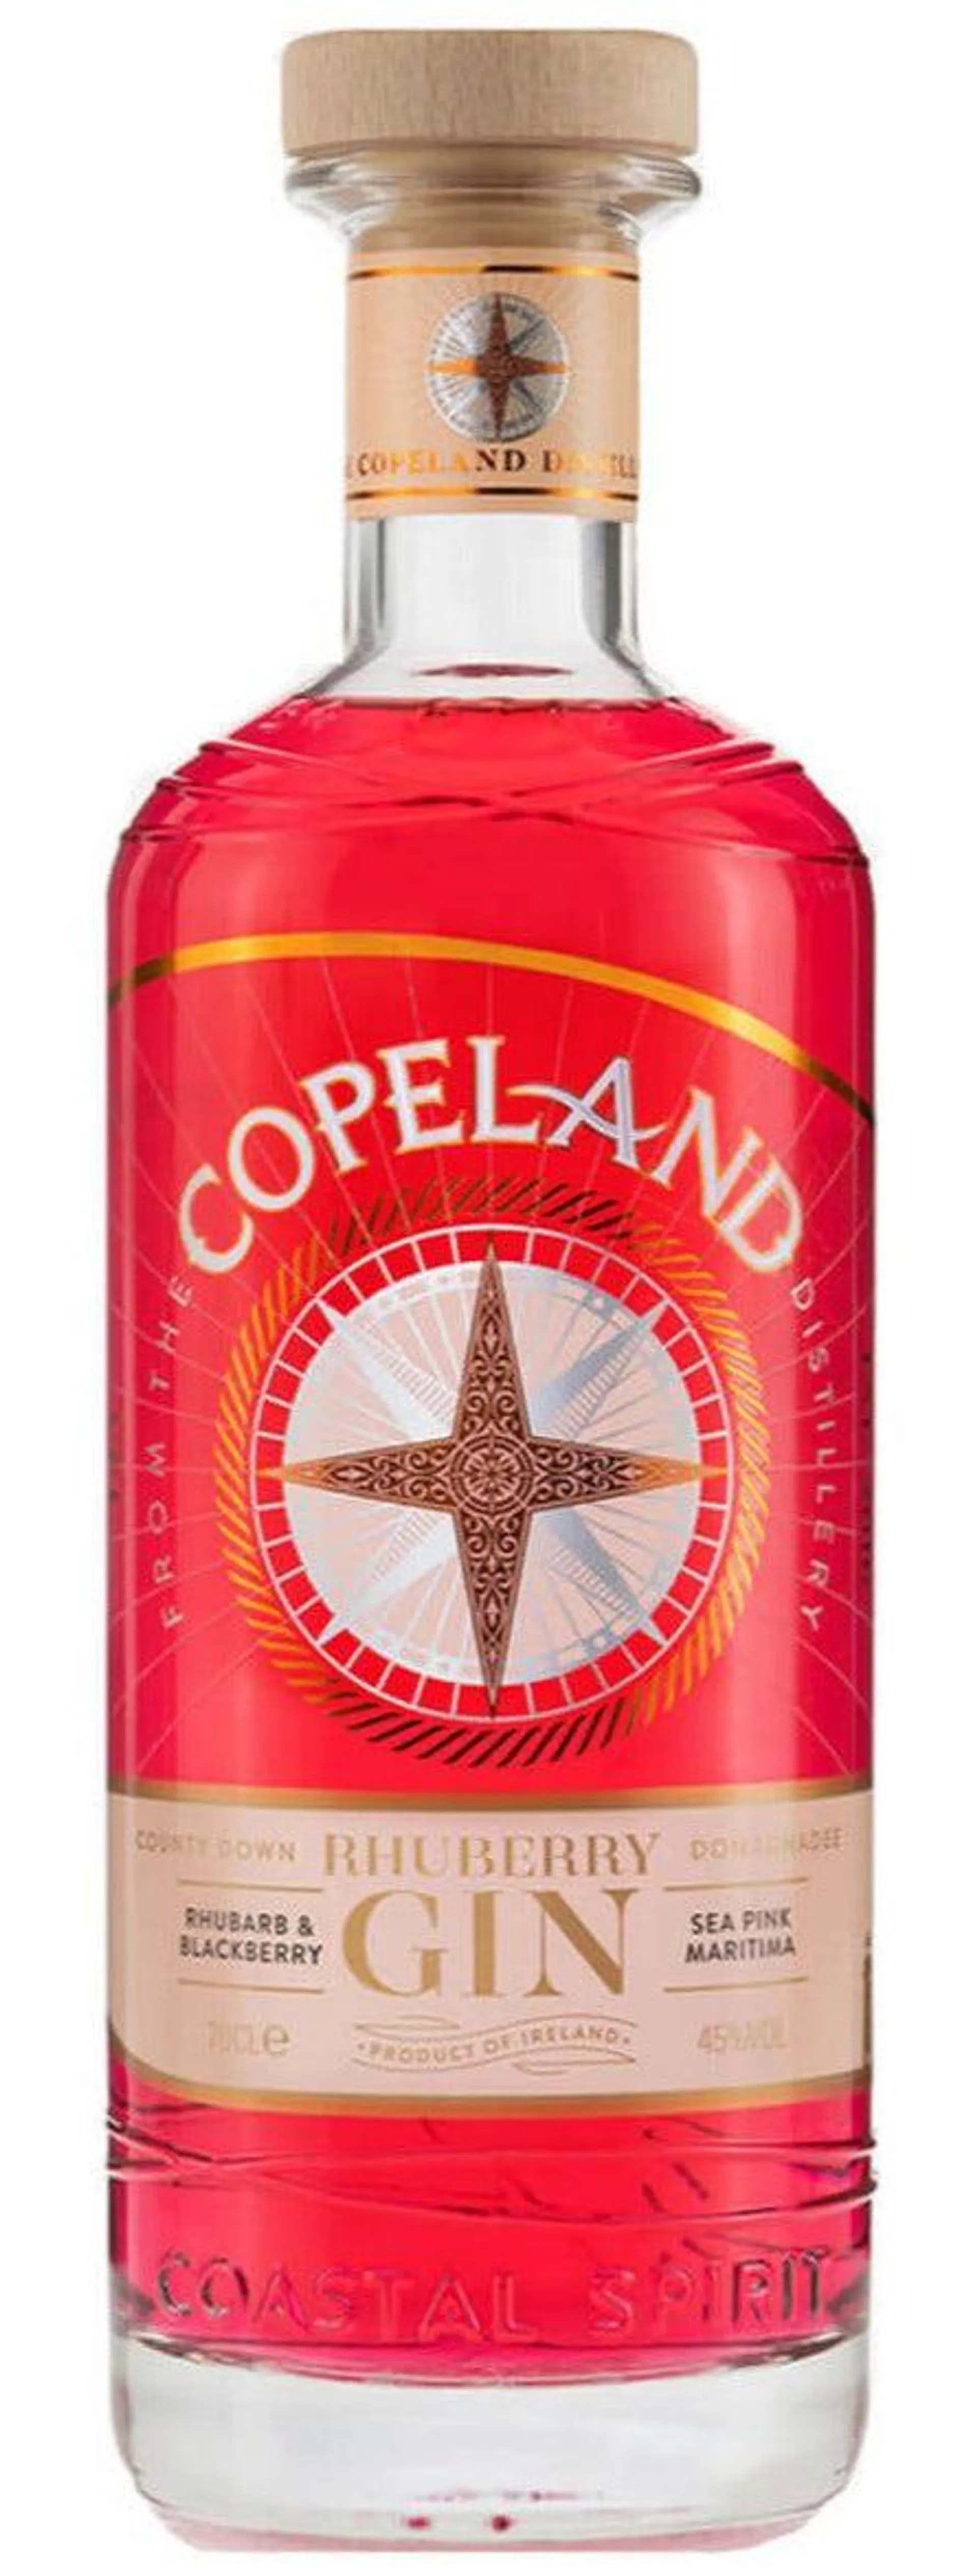 Copeland Rhuberry Gin 70cl